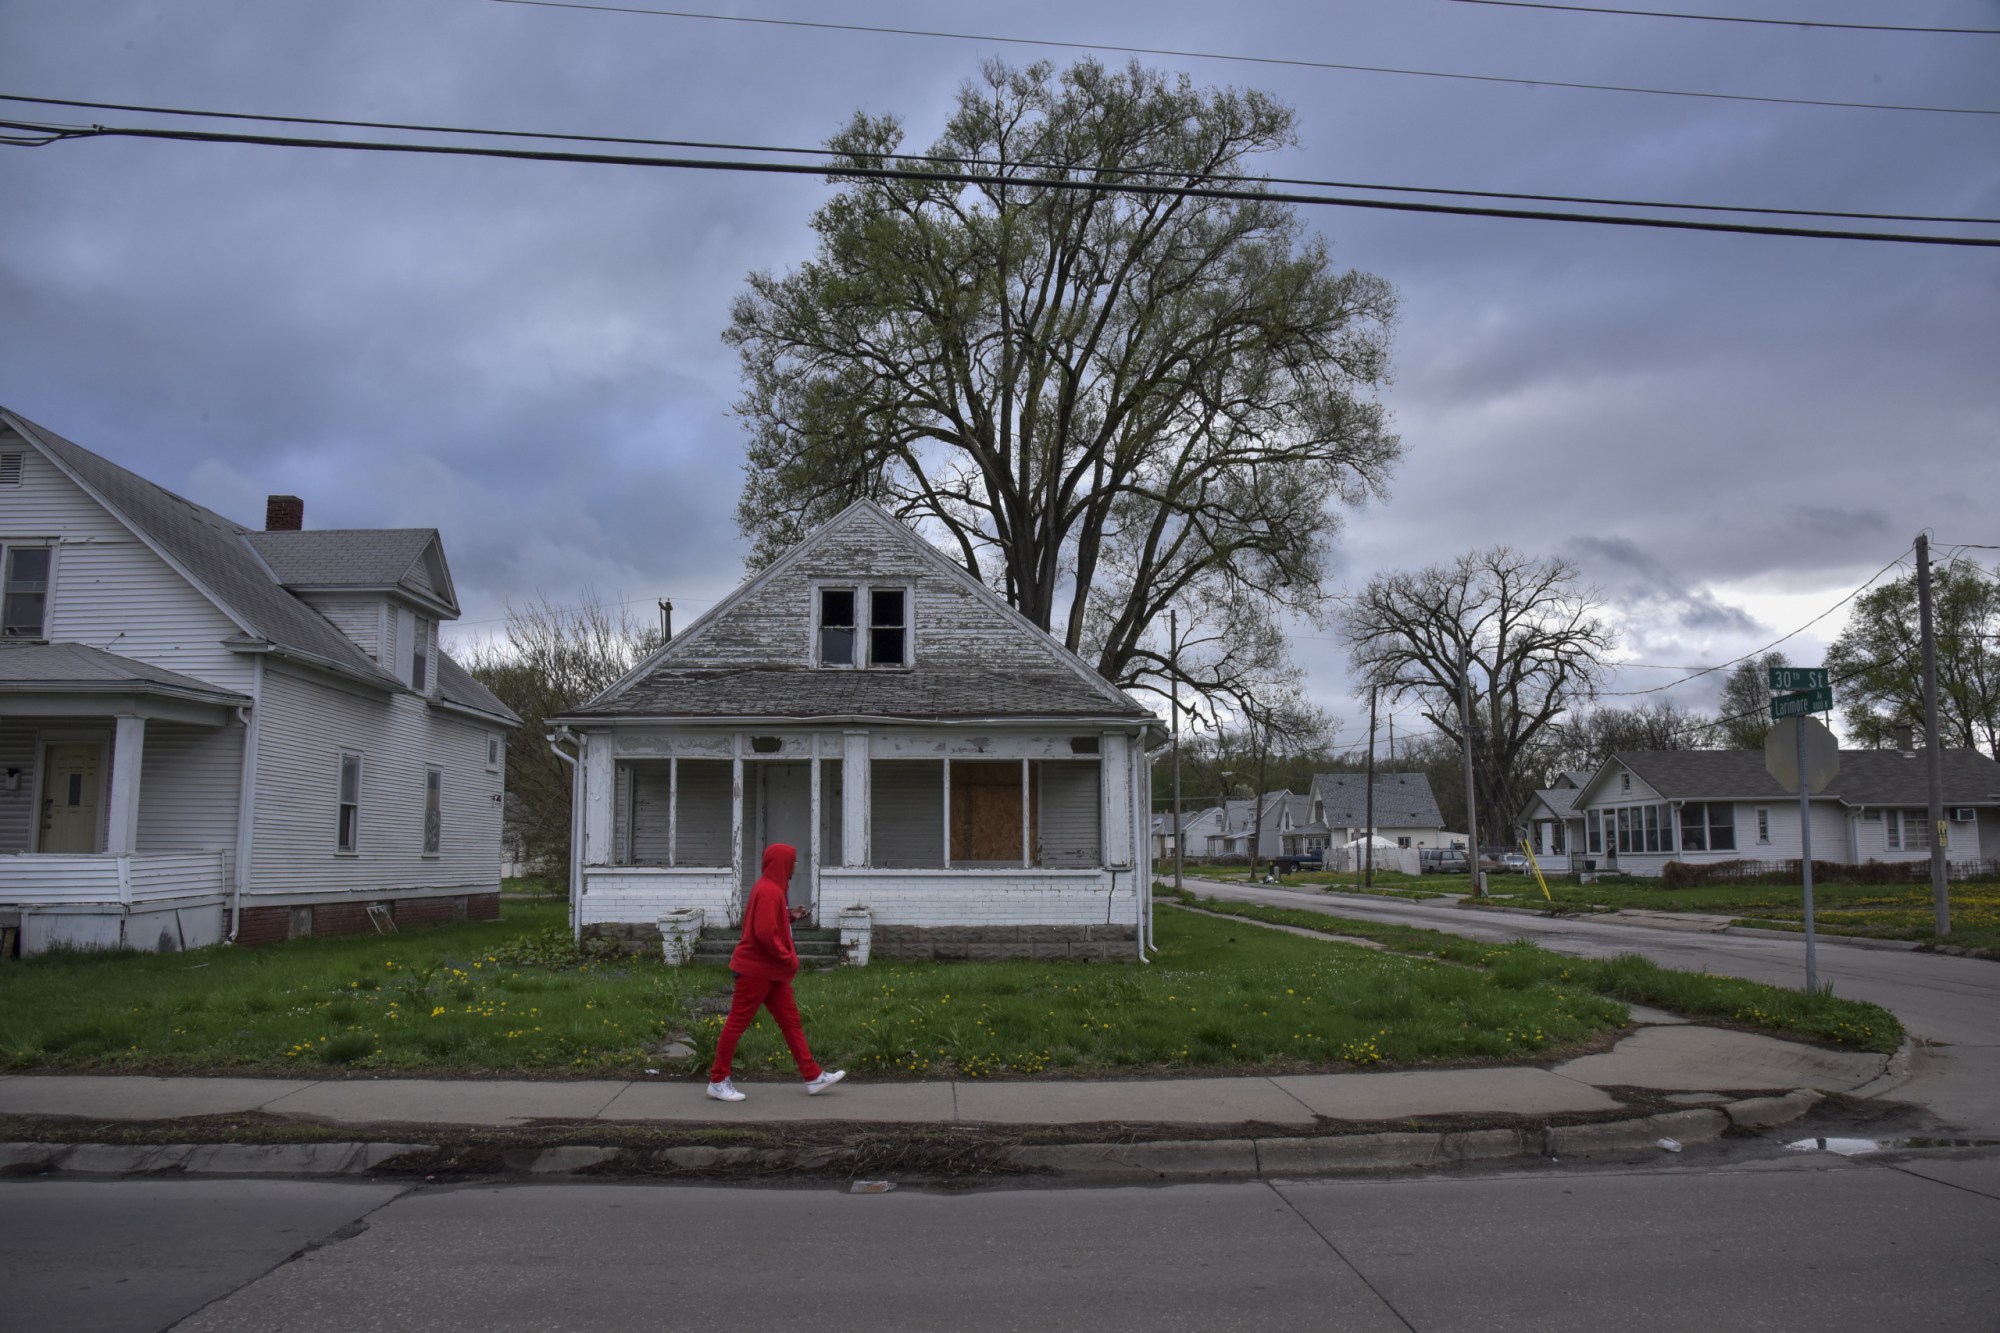 A pedestrian passes in front of a shuttered house in Omaha, Nebraska on a cloudy evening on Thursday, May 3, 2018. (A pedestrian passes in front of a shuttered house)